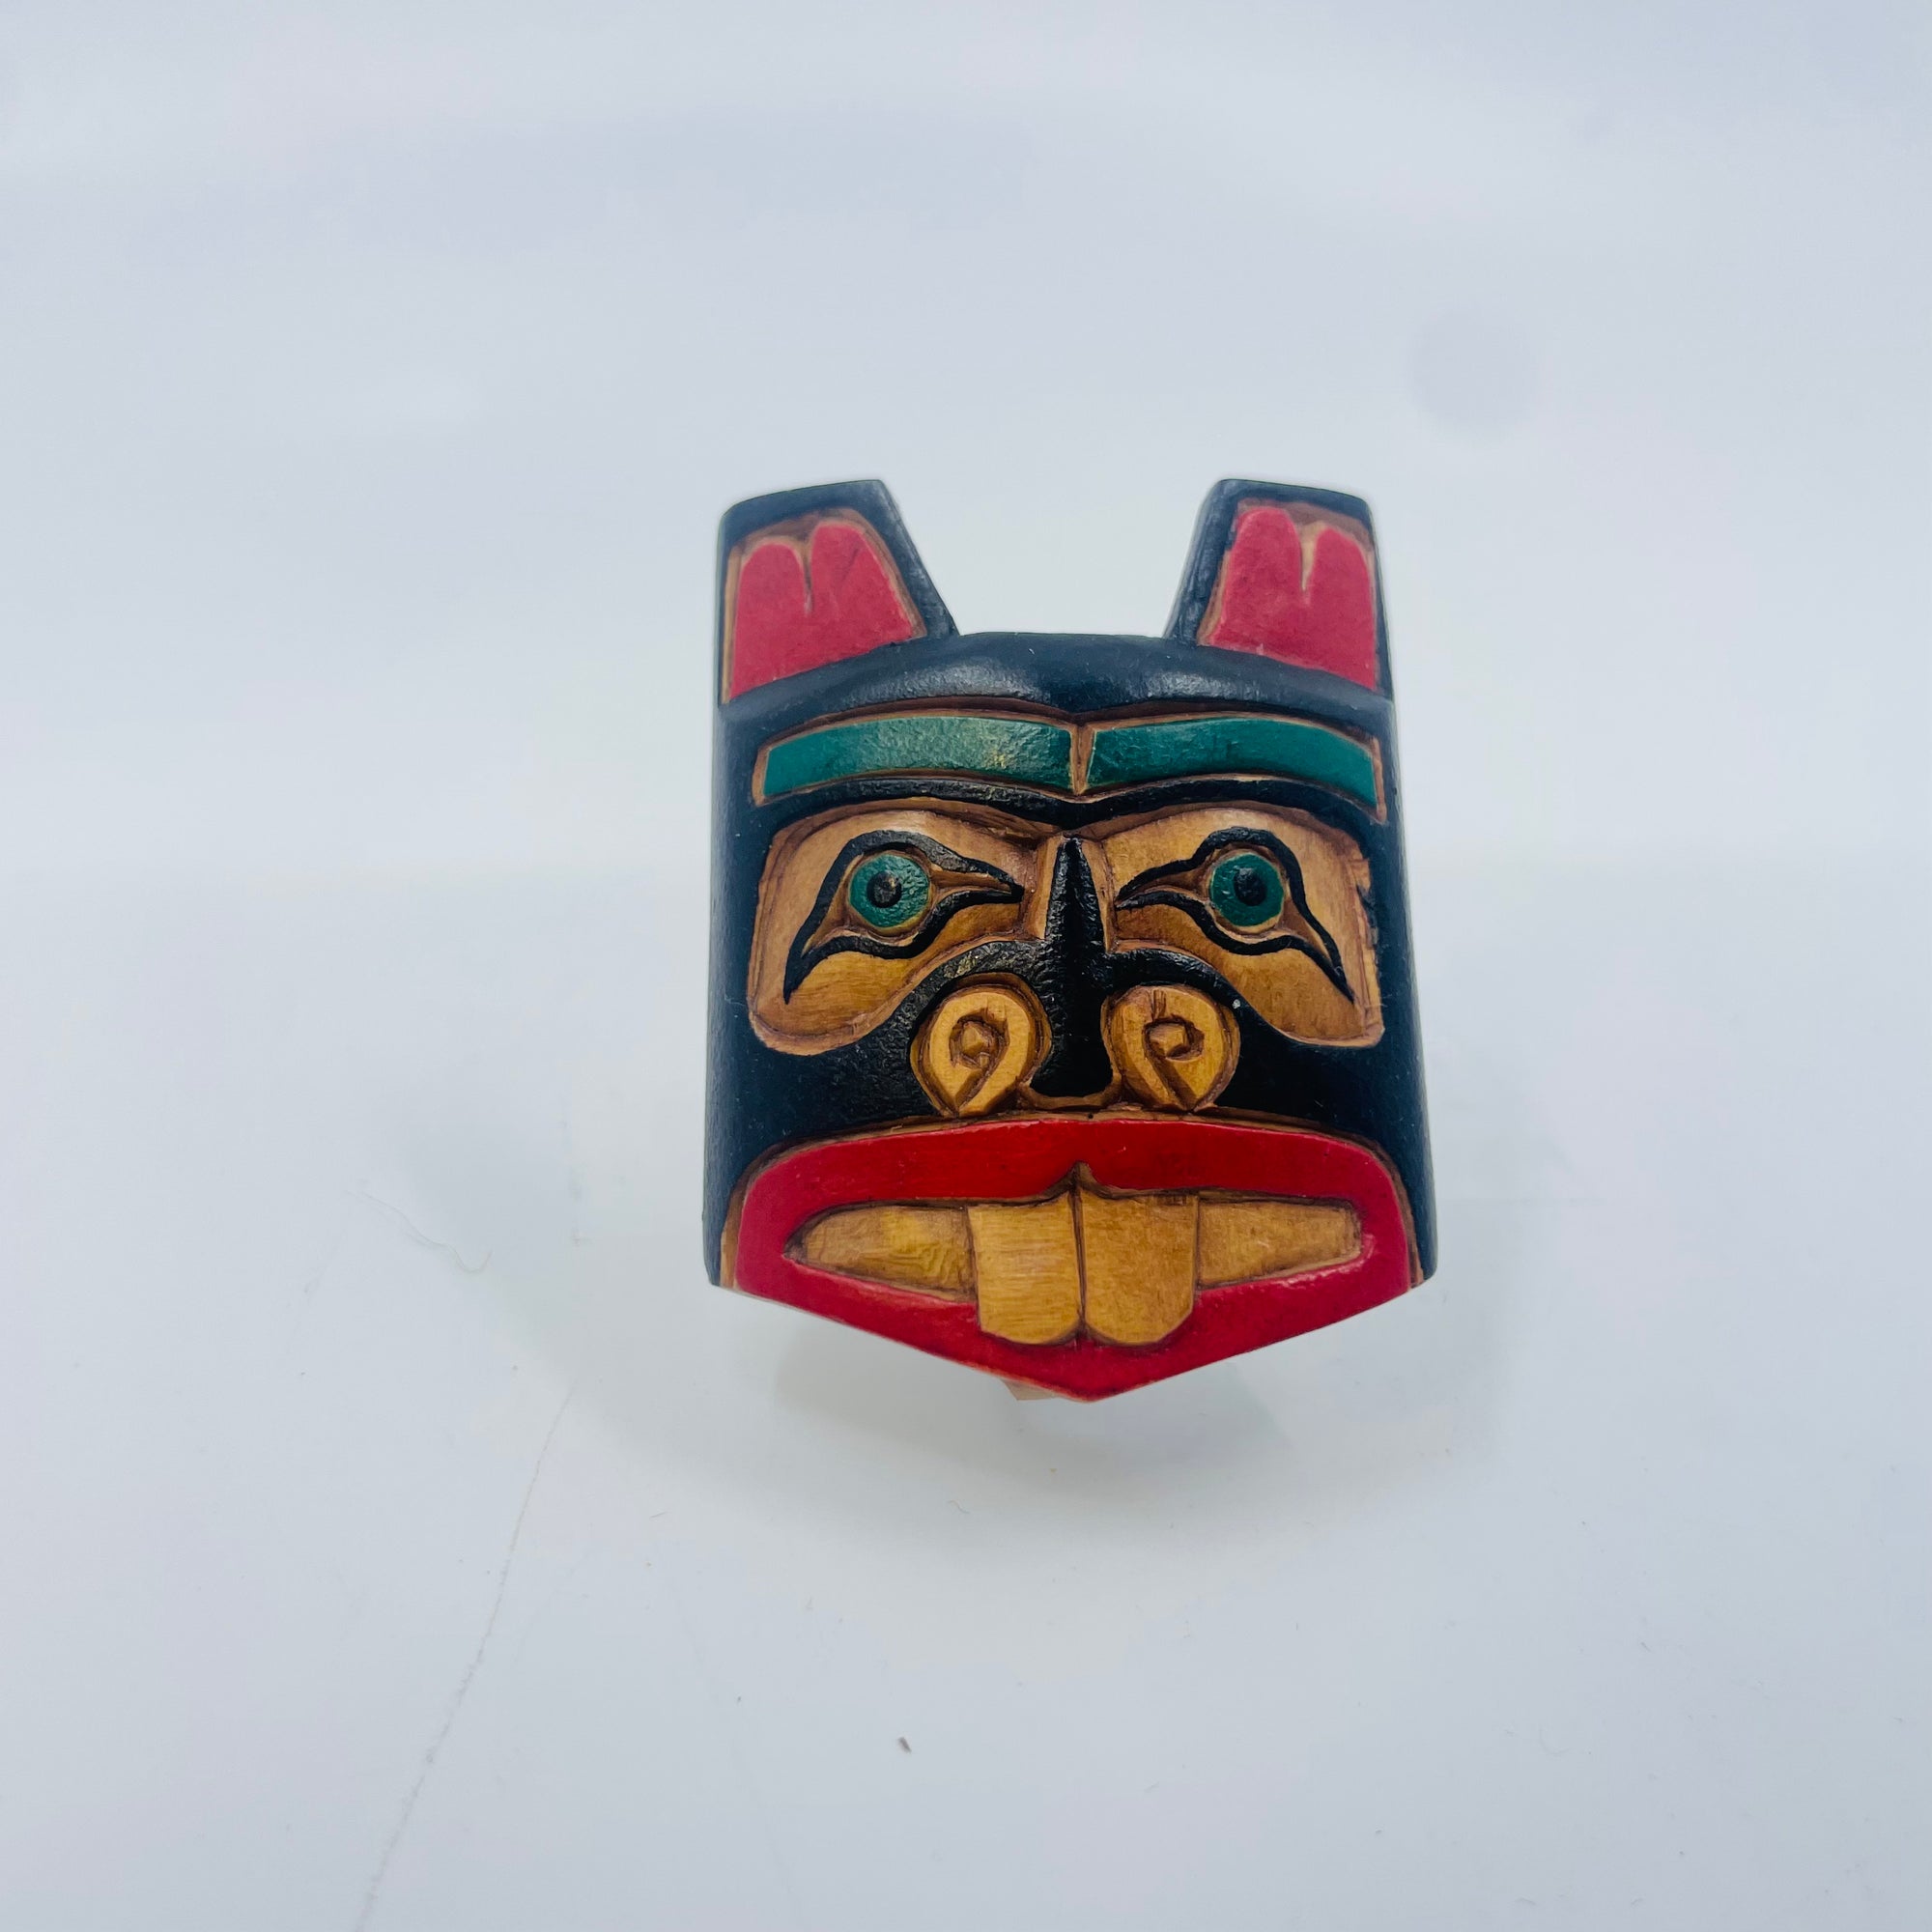 Artie George Magnets - Beaver - WM-Magnets-11a - House of Himwitsa Native Art Gallery and Gifts